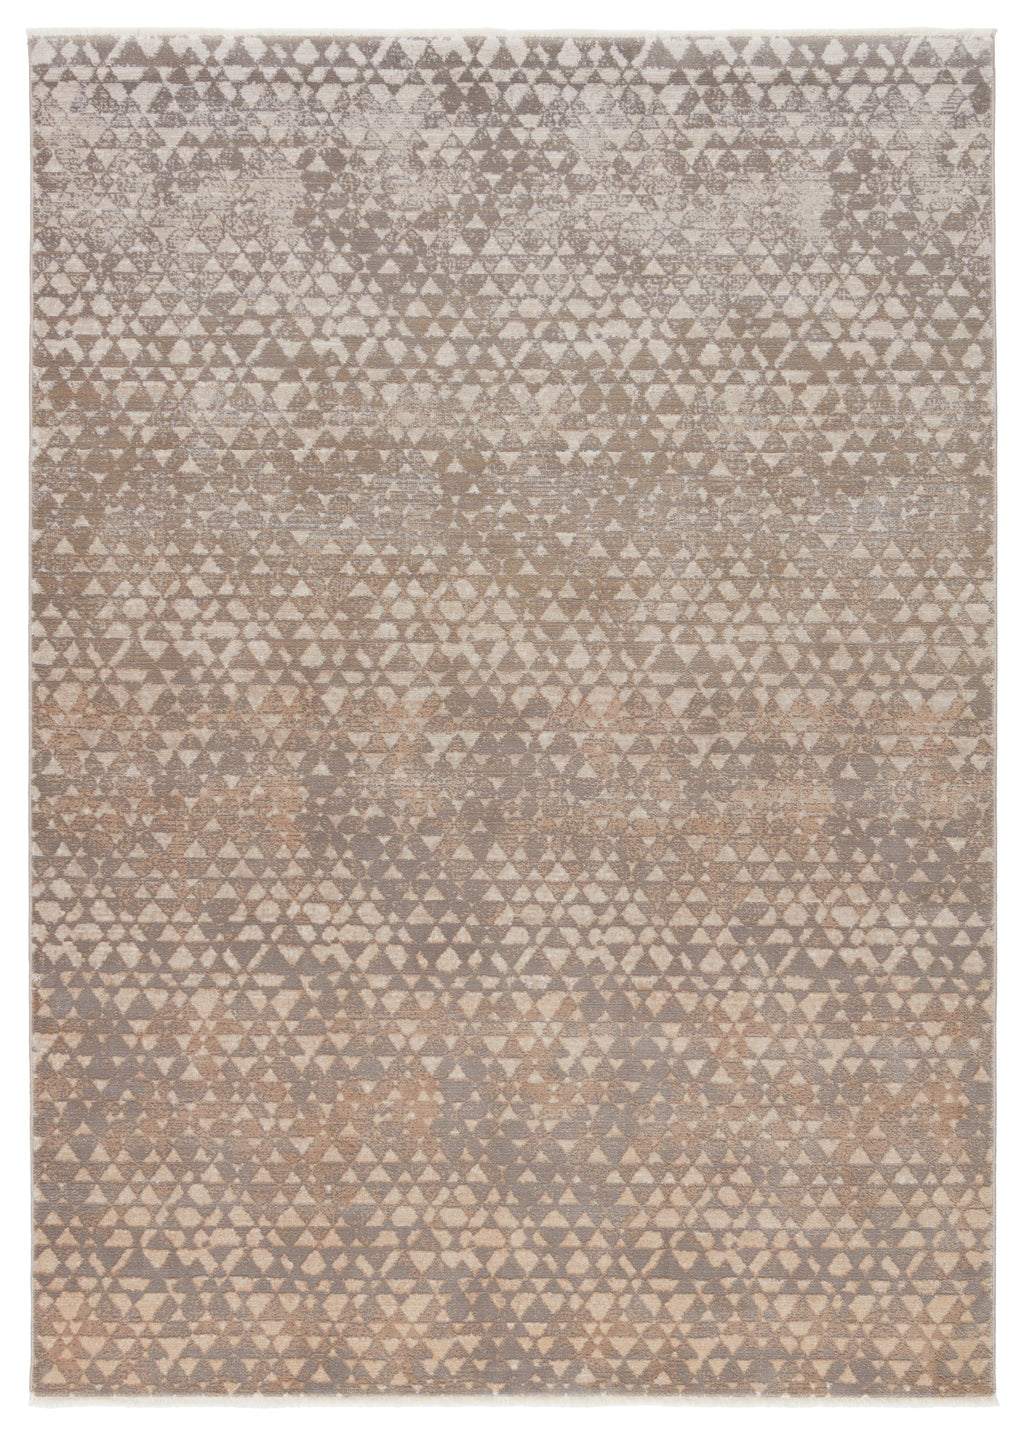 Land Sea Sky Sierra Taupe & Gray Rug by Kevin O'Brien 1